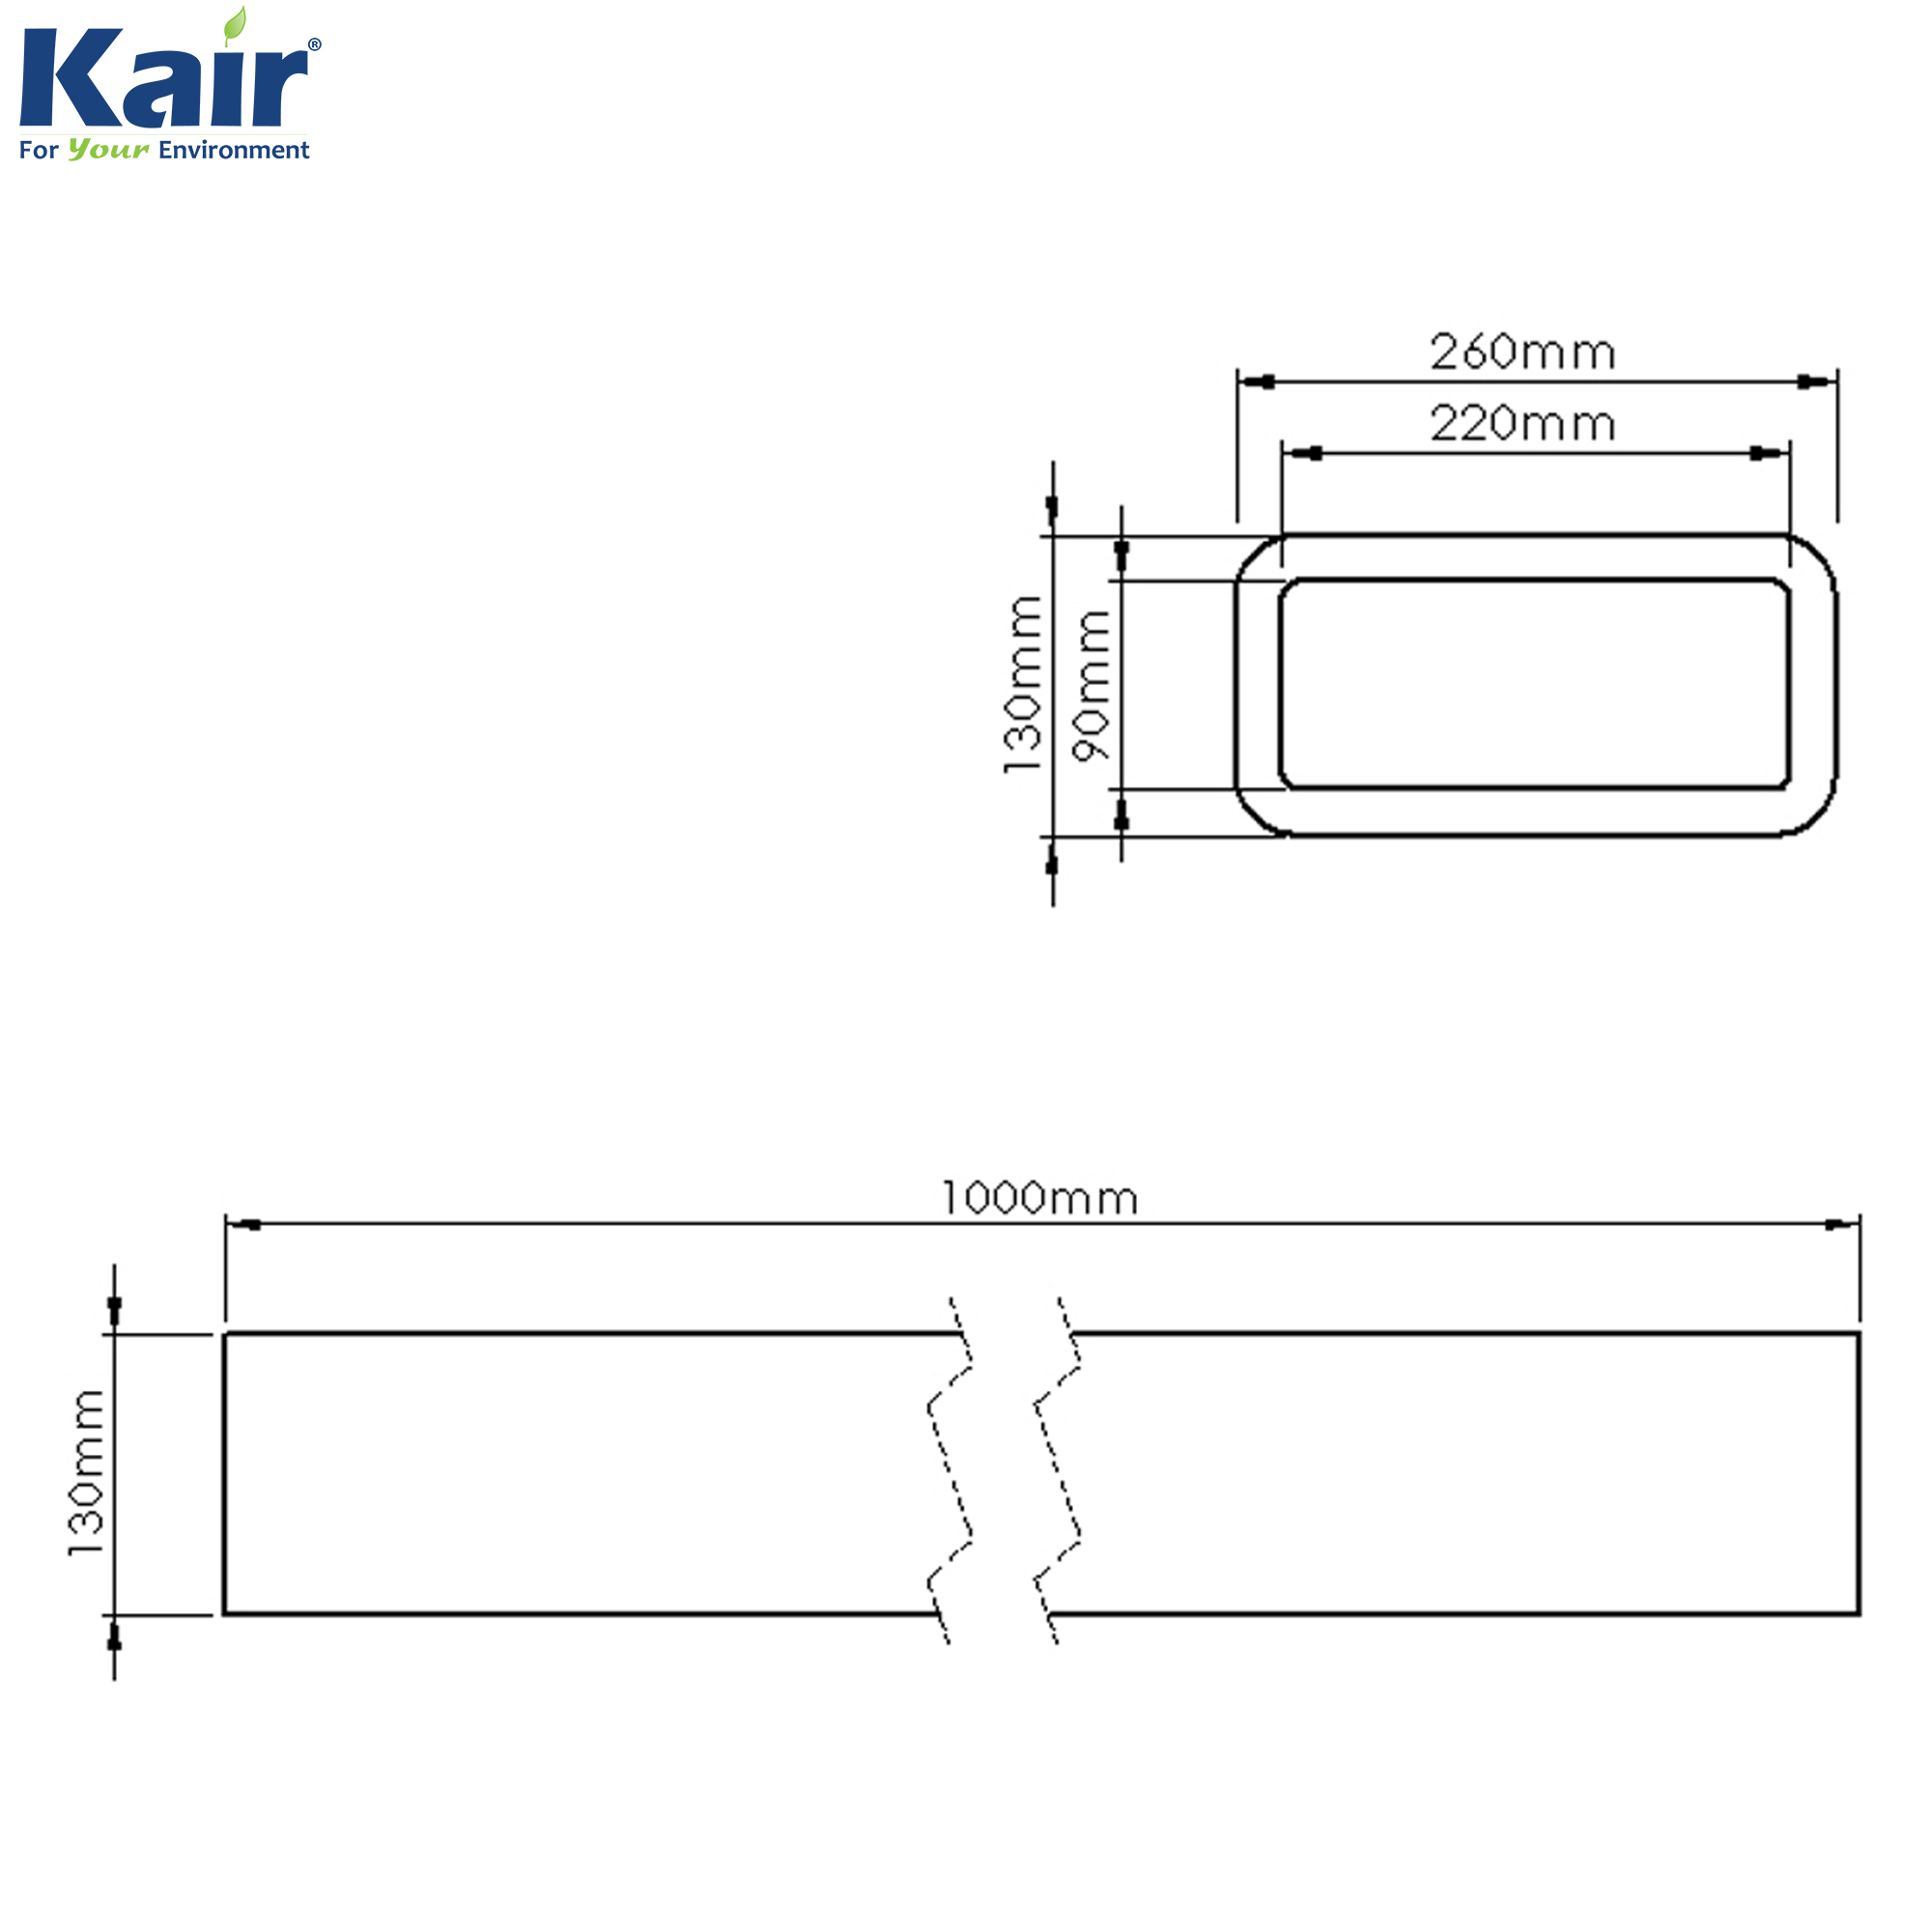 Box of 6 x Kair Self-Seal Thermal Ducting 220X90mm 1 Metre Lengths Complete With 1 Male Duct To Duct Connector